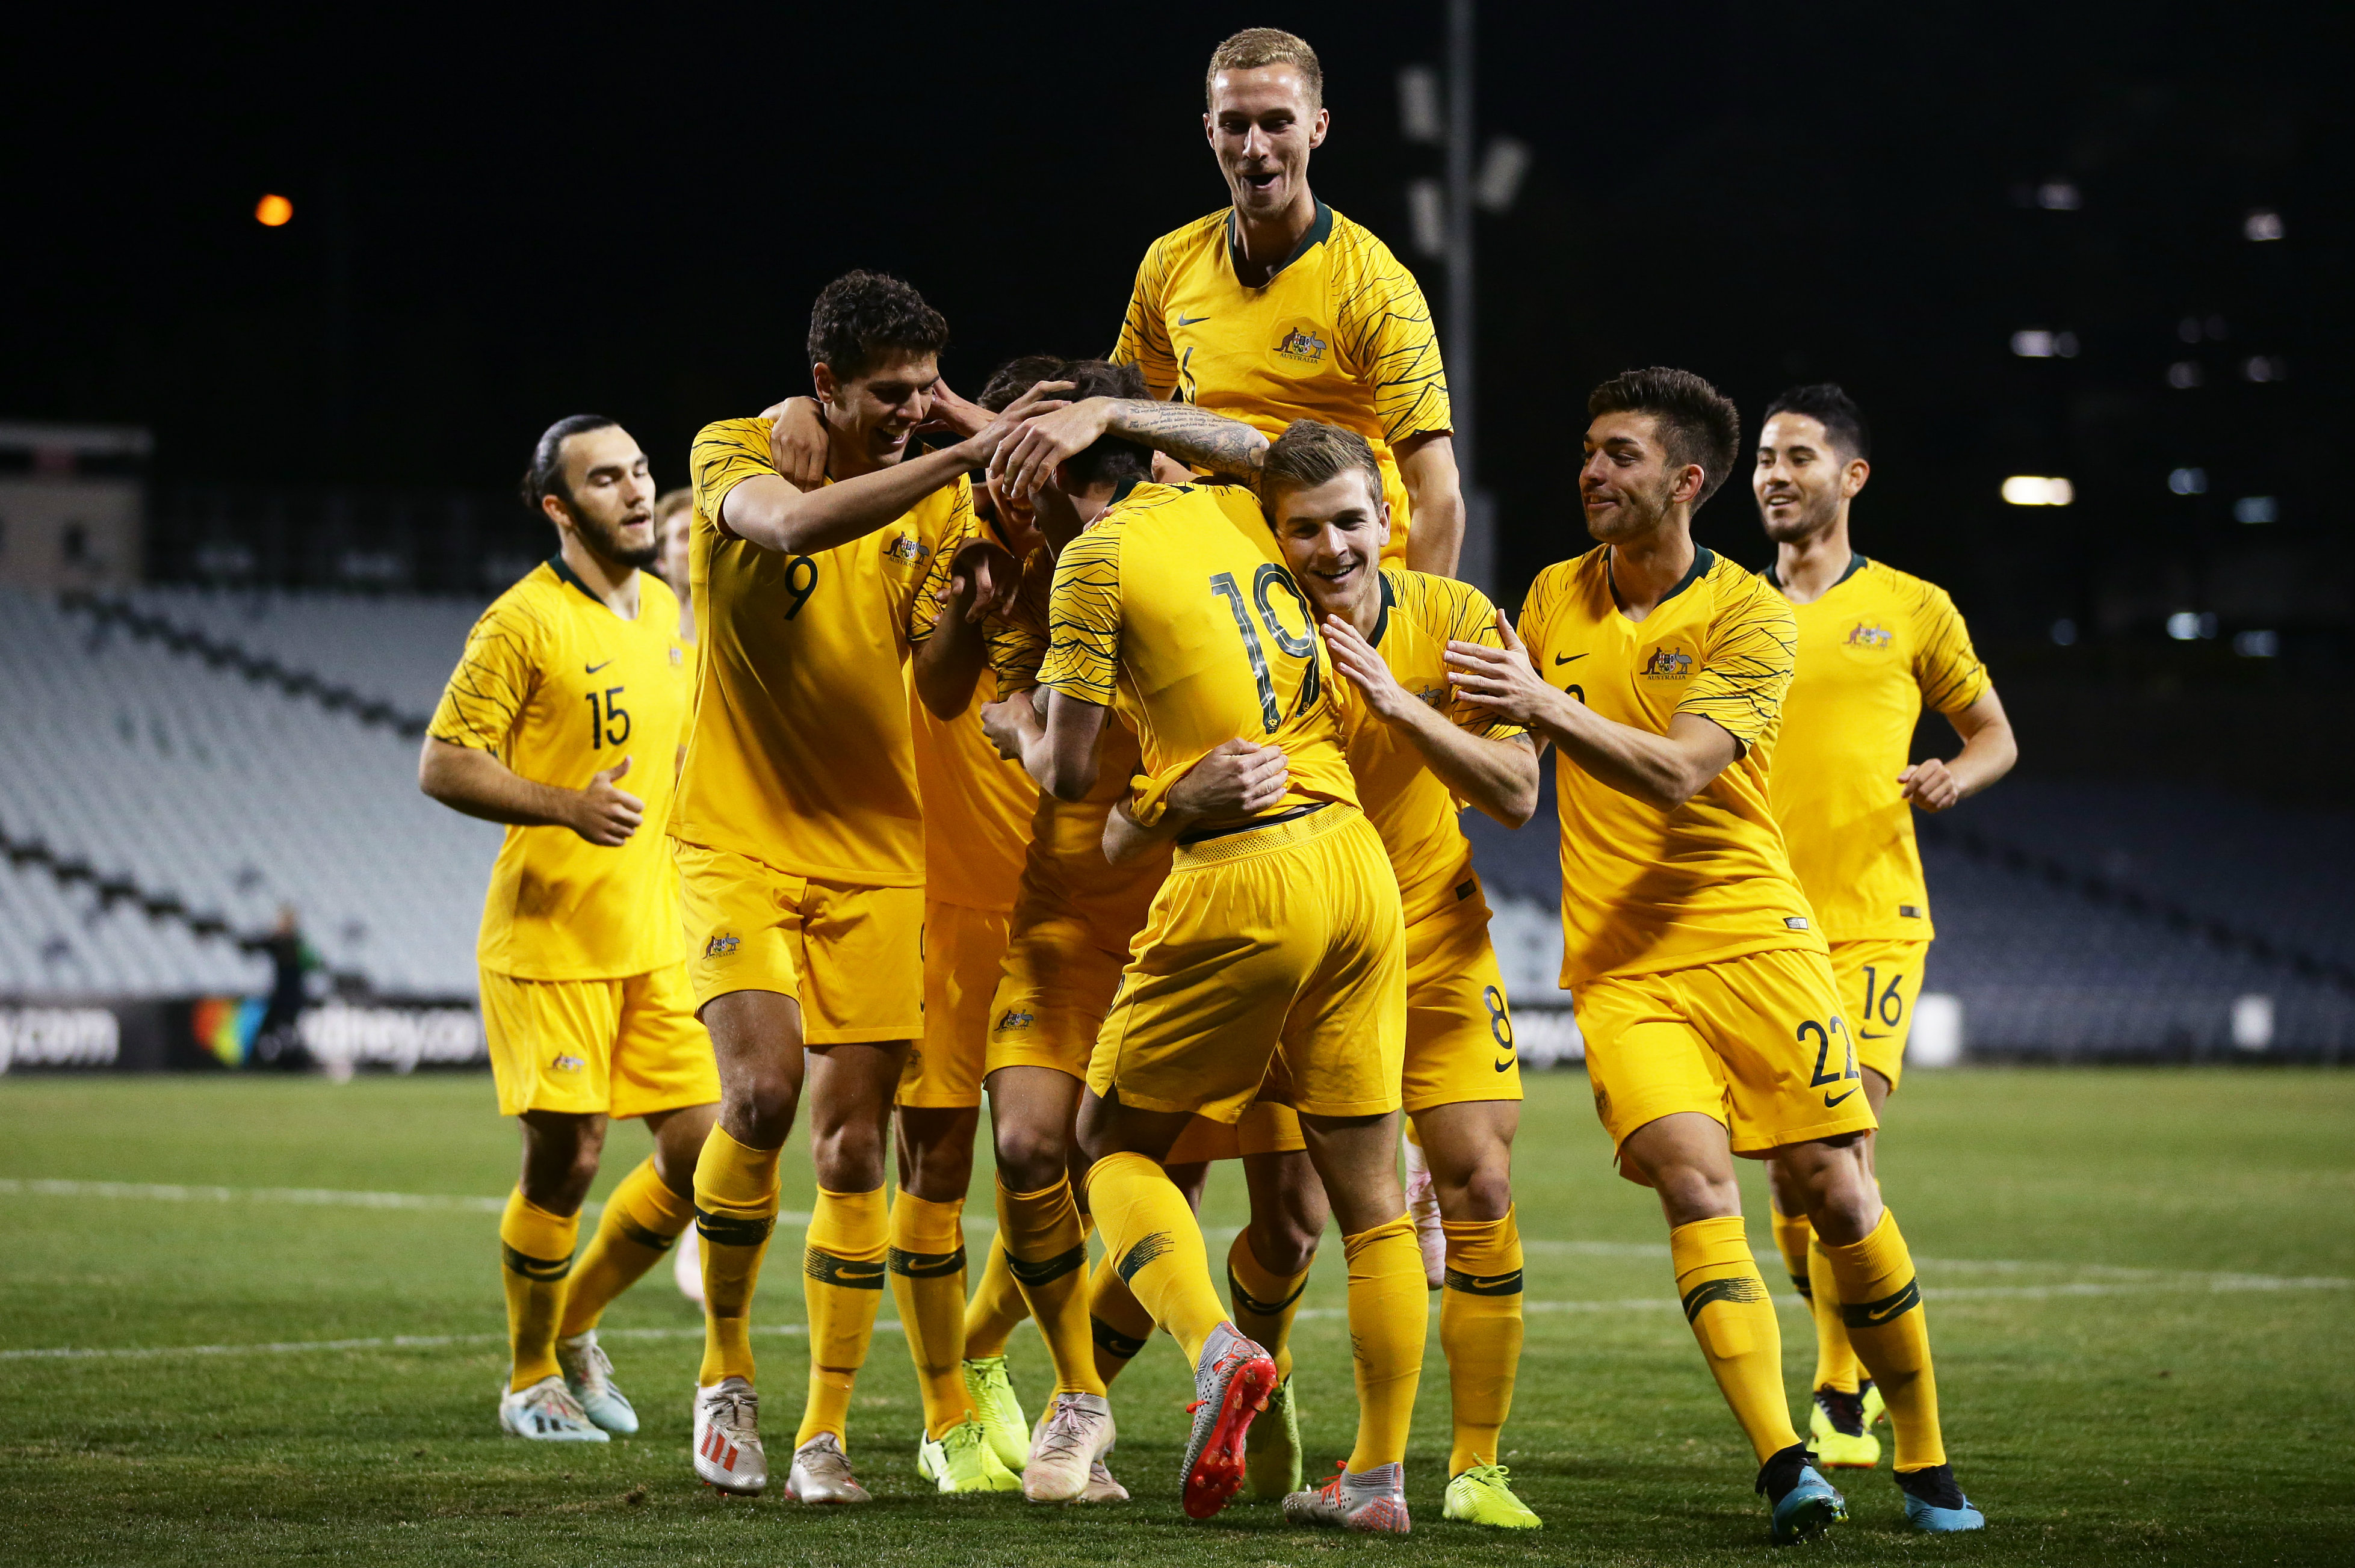 Match schedule confirmed for Australia at 2020 AFC U-23 Championship